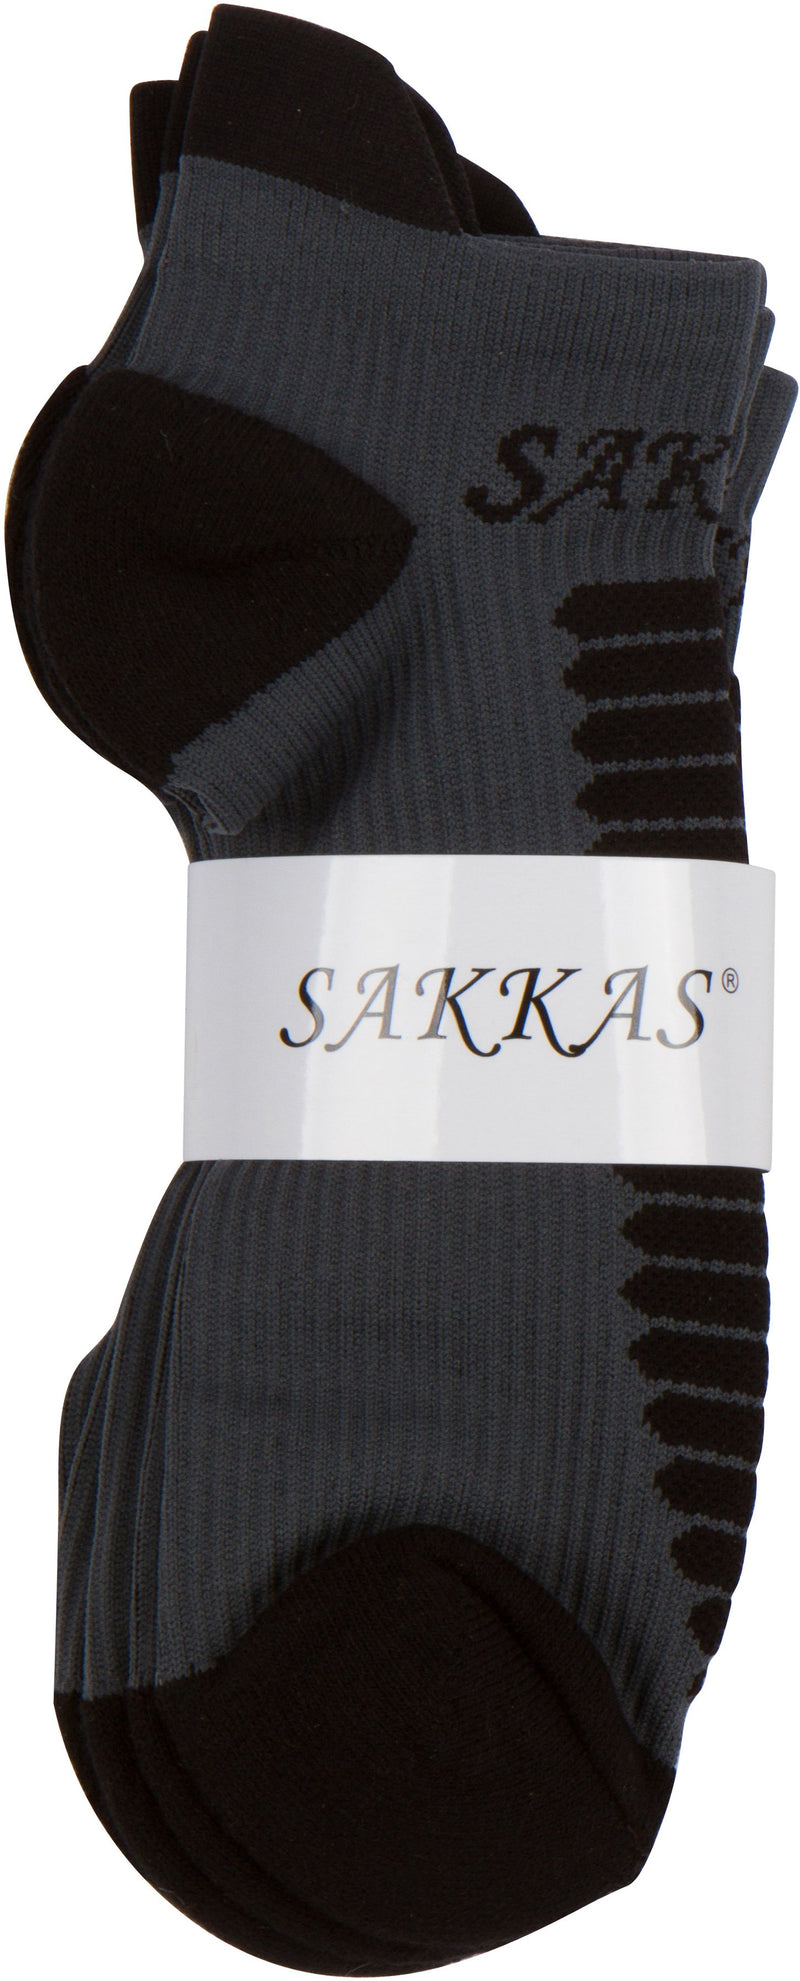 Sakkas Mens Best Pro Low Heavyweight Compression Ankle Performance Socks - 3 Pack